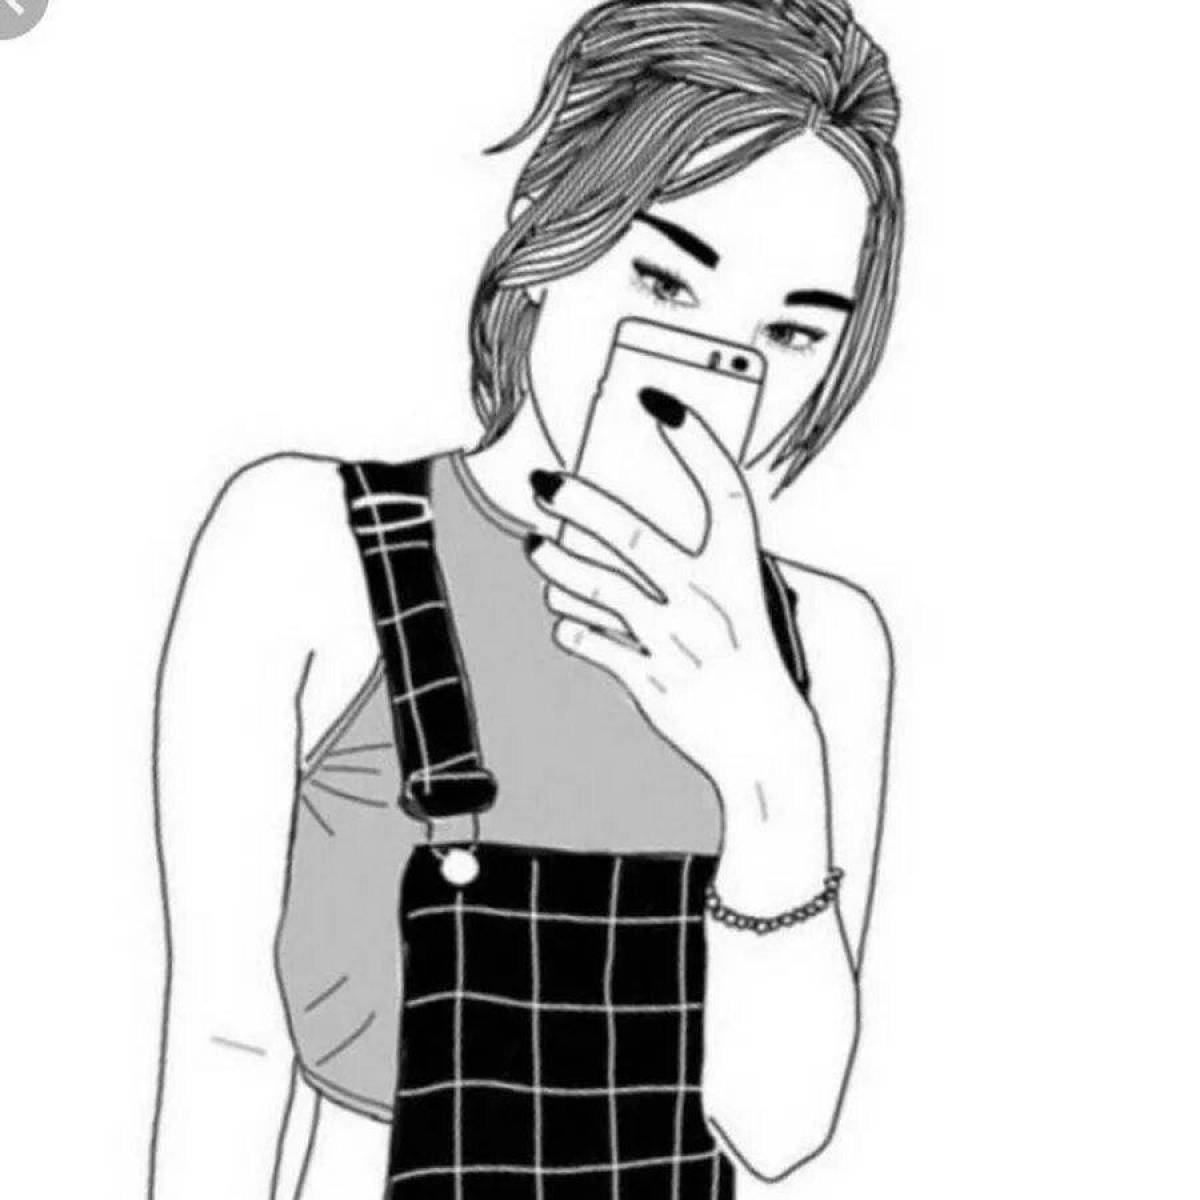 Fascinating coloring girl with a phone